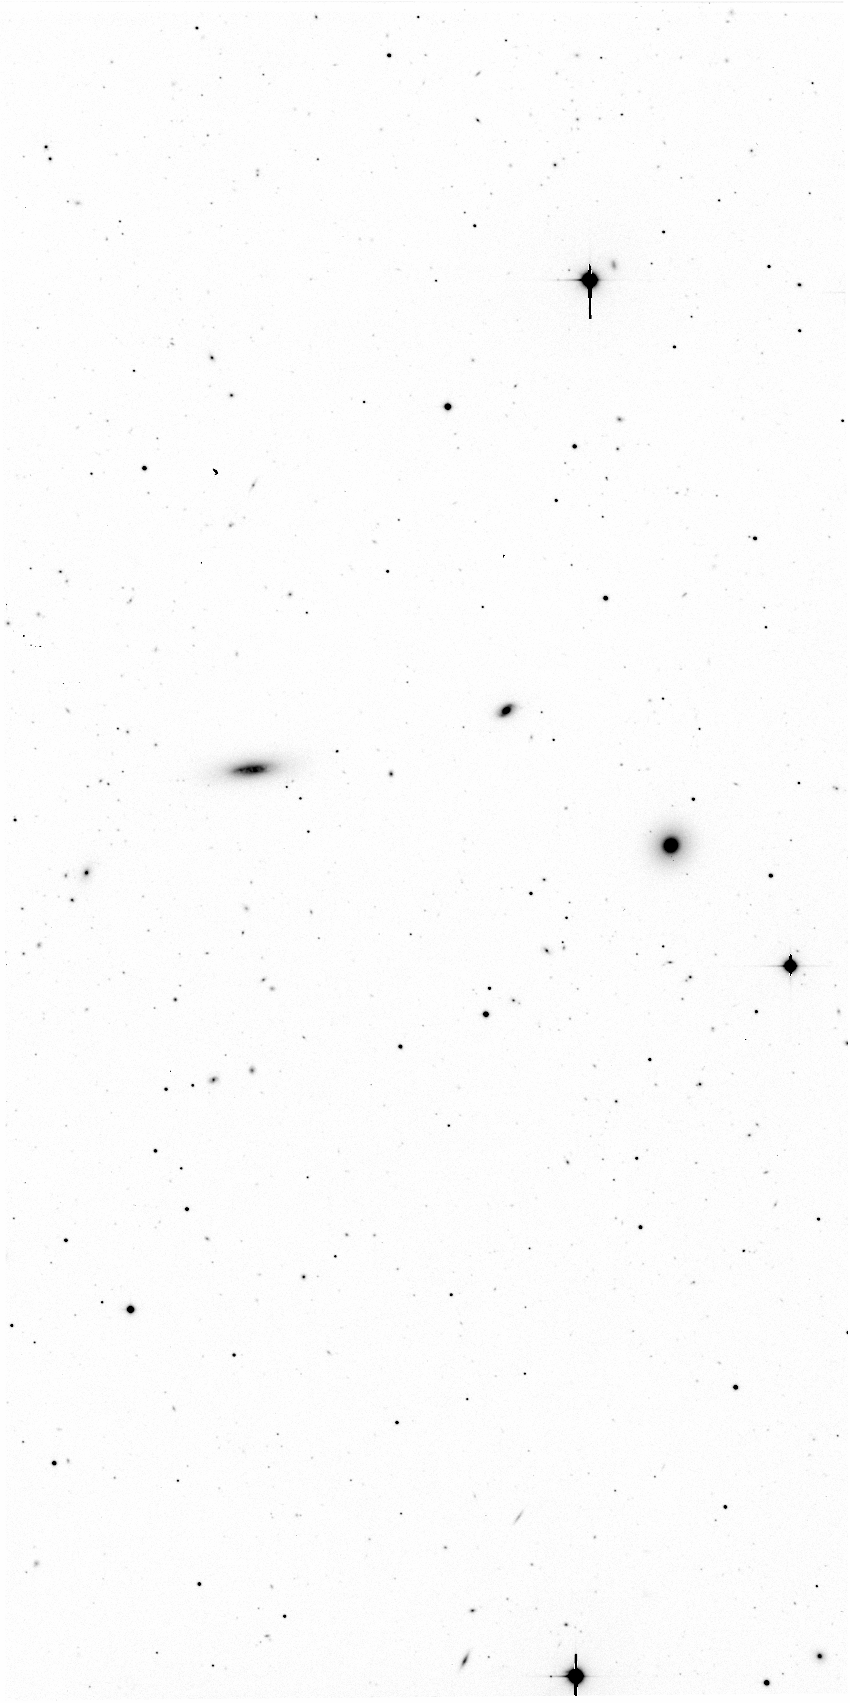 Preview of Sci-PHERAUDEAU-WFC-------193-A5383-17-7-Regr---Sci-54020.5130025-02bba38e24df6bc83cb21d39771630797bcaad58.fits